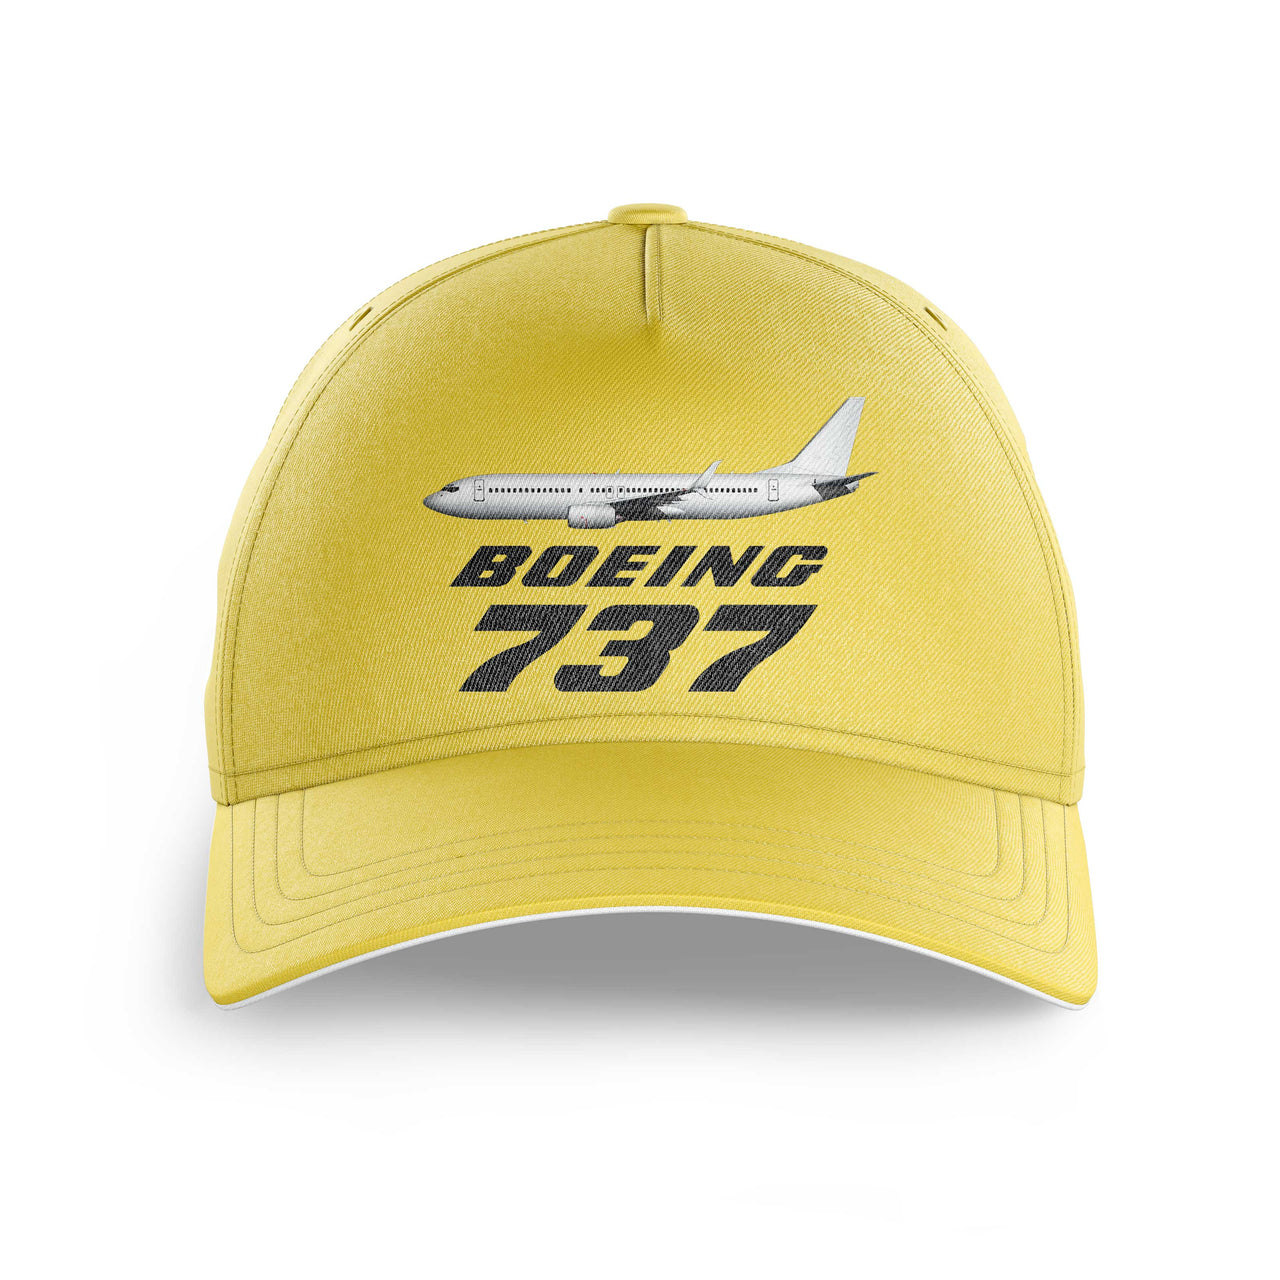 The Boeing 737 Printed Hats